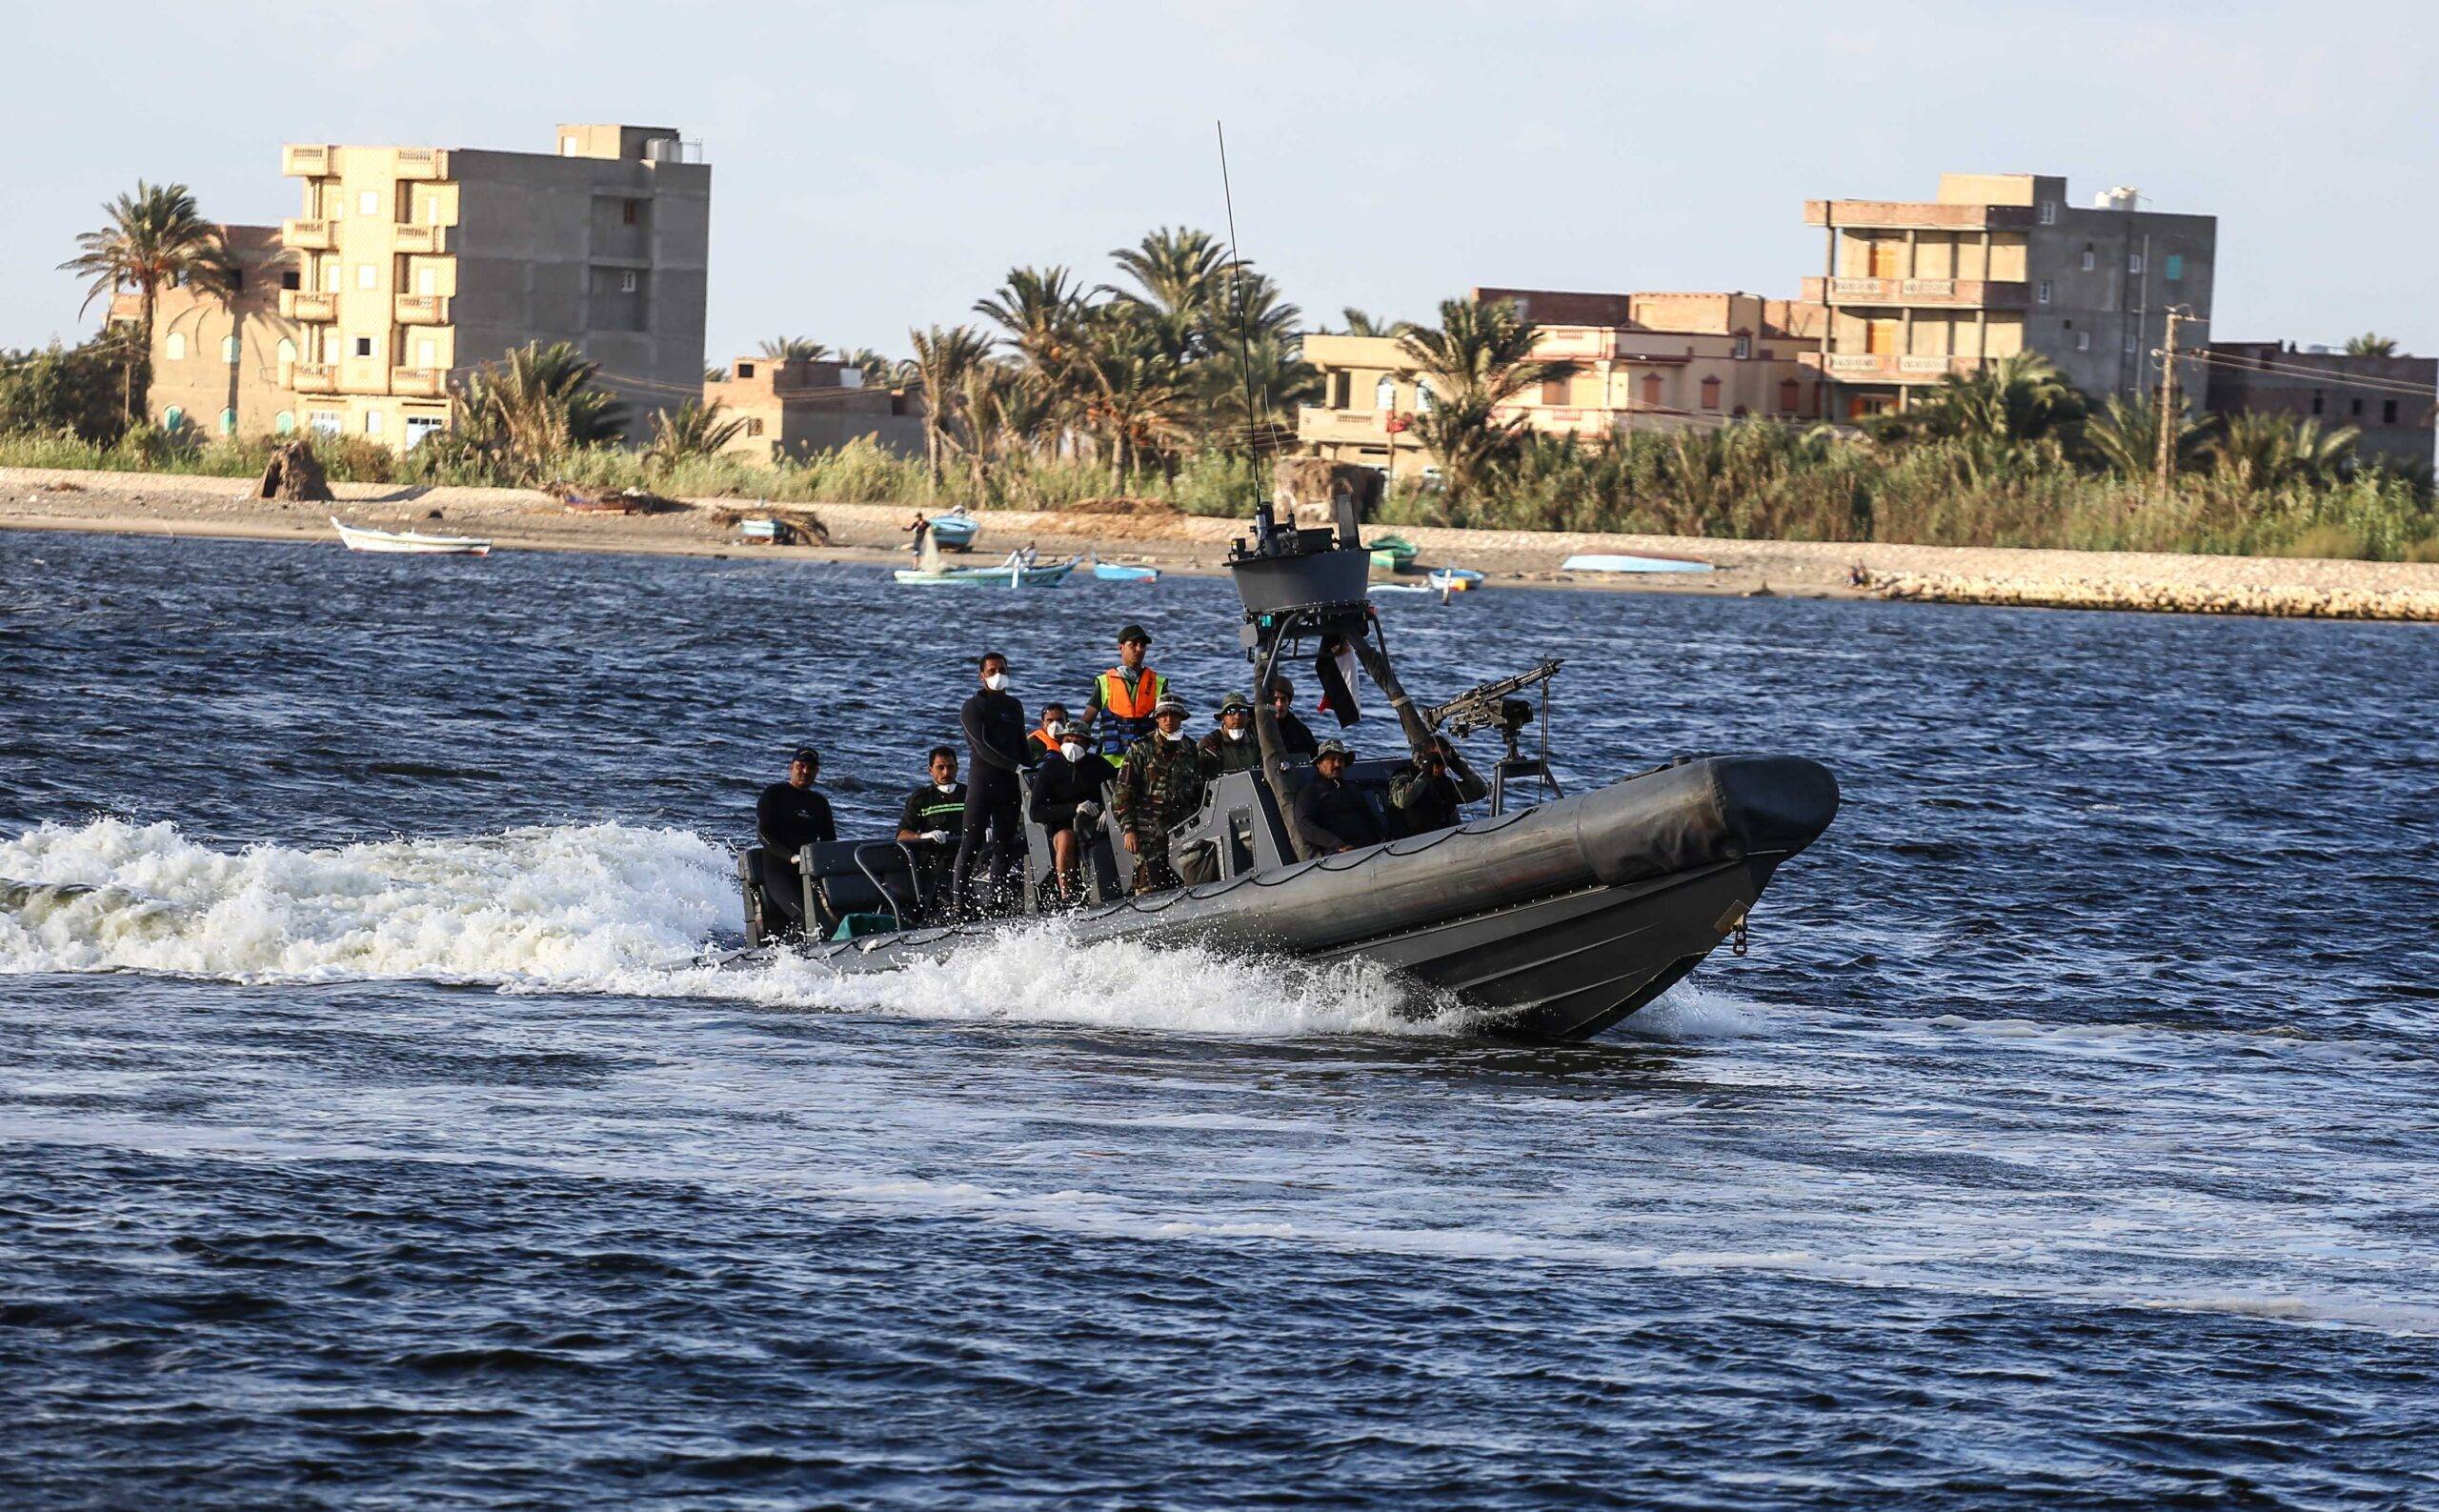 Egyptian security forces search for migrants after their boat submerged, at Port Rashid in Beheira, Egypt [İbrahim Ramadan/Anadolu Agency]